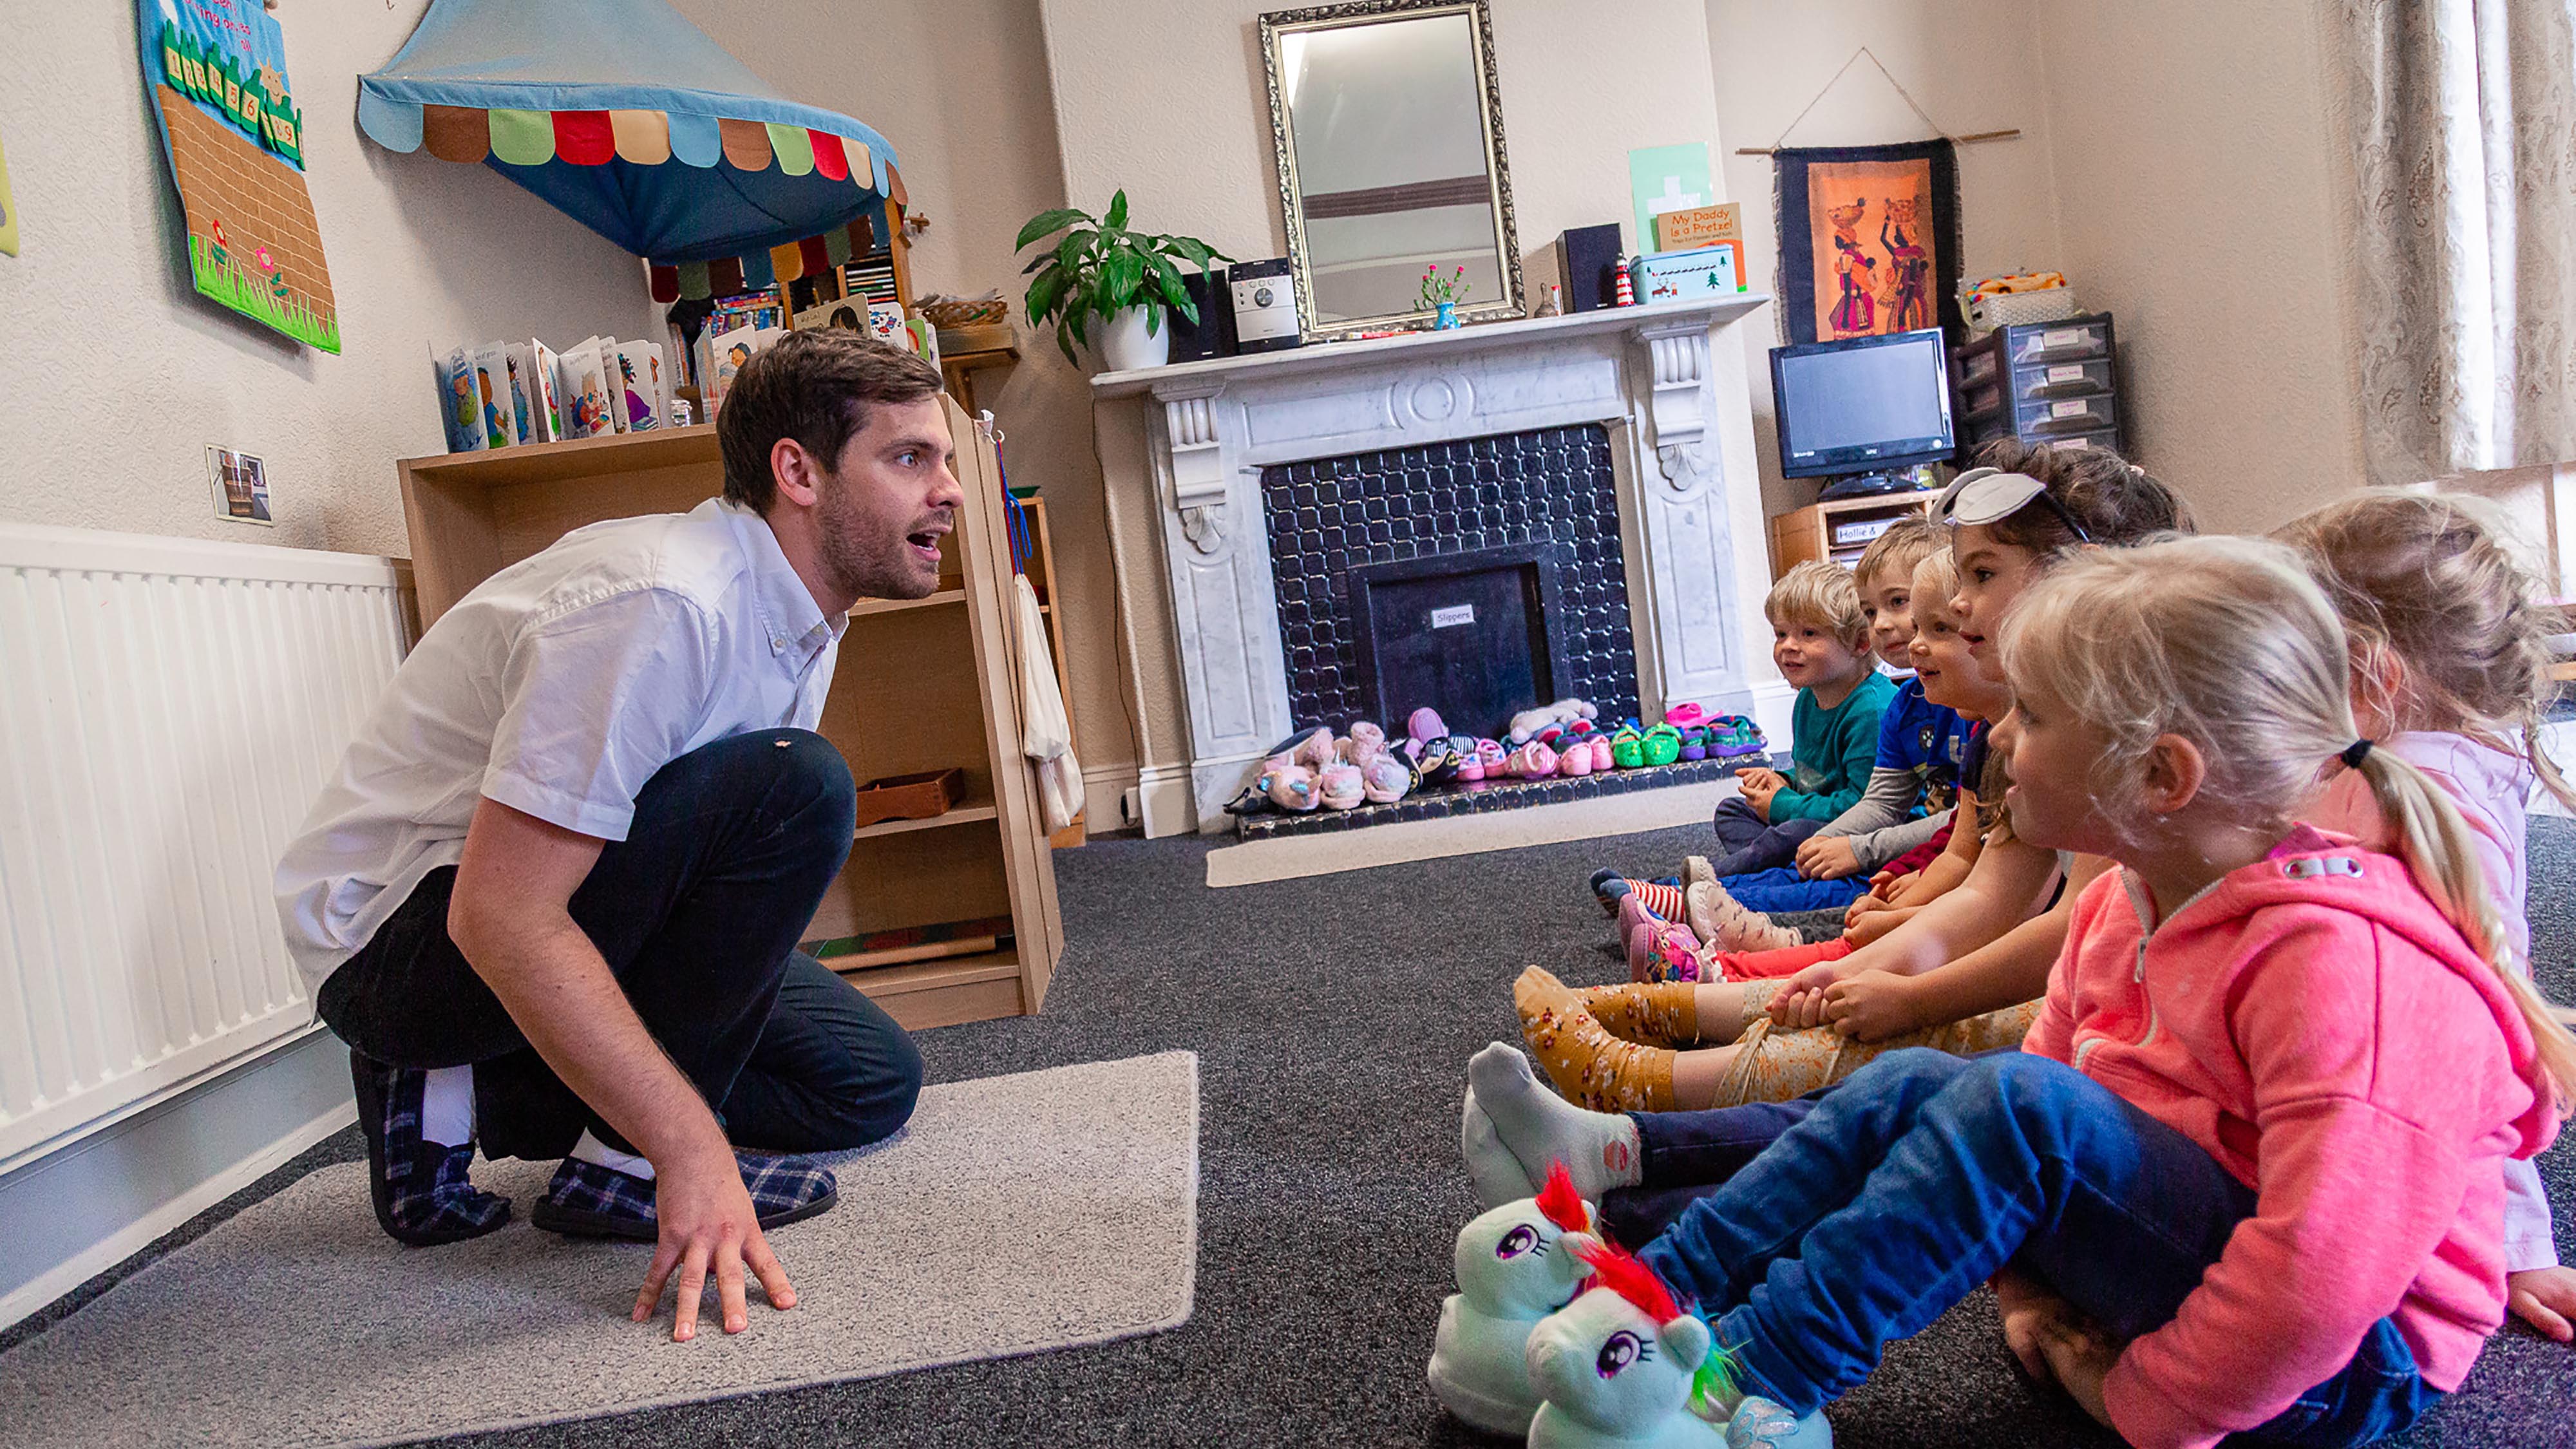 Early Years leader engages young children with a story